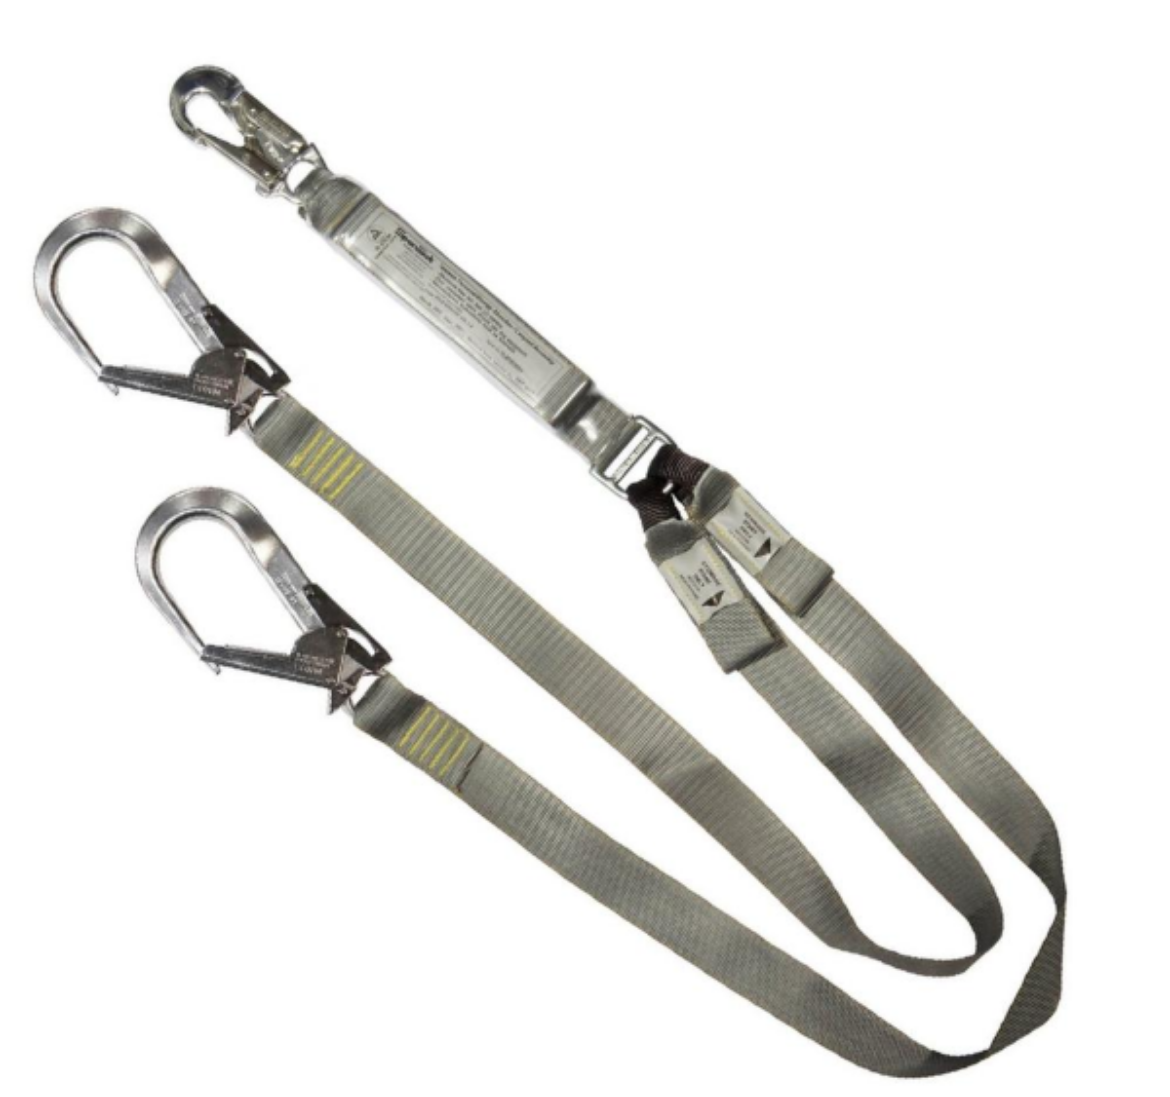 Picture of 140KG ENERGY ABSORBING WEBBING TWIN ACCESS LANYARD 1.8M WITH ALUMINIUM H1 SNAP HOOK AND ALUMINIUM H3 SCAFFOLD HOOKS (600MM GATE OPENING THE OTHER END)